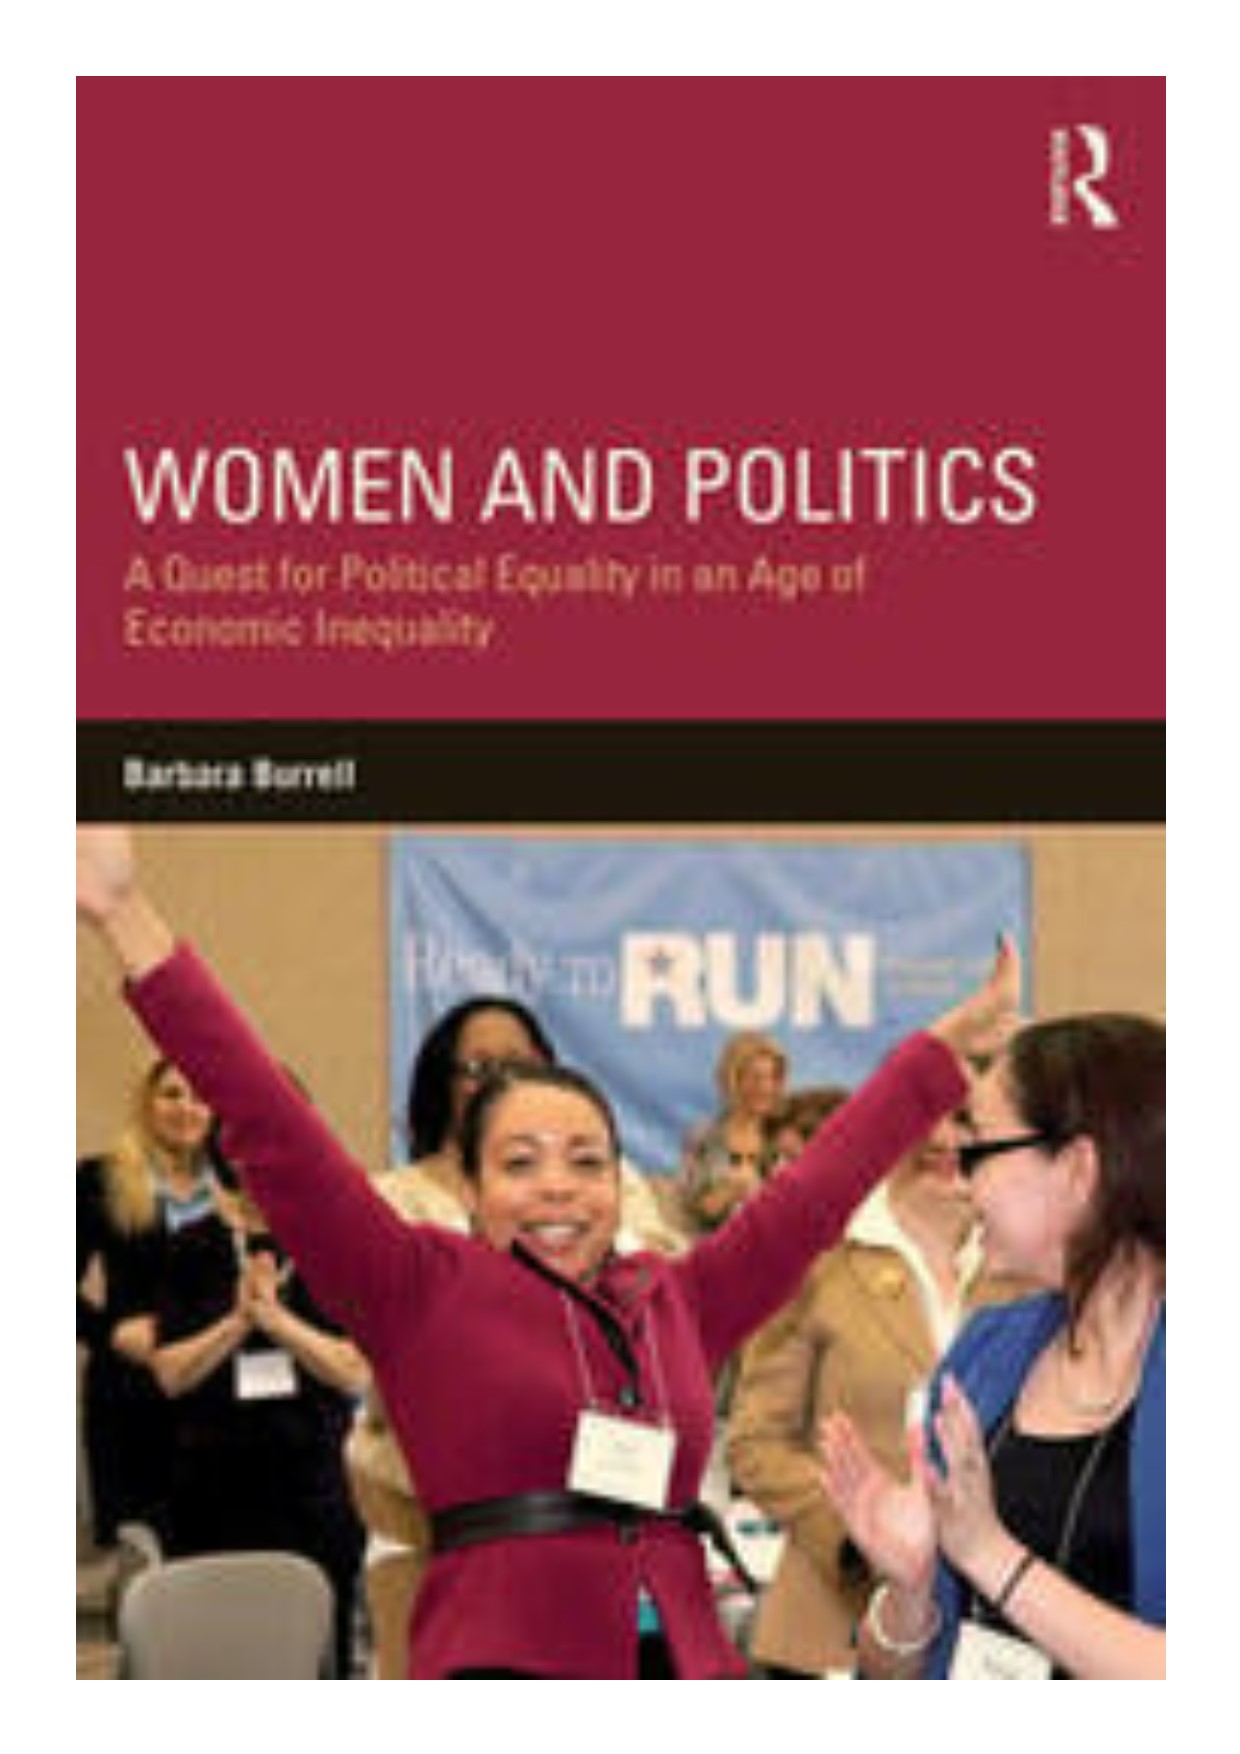 Women and politics a quest for political equality in an age of economic inequality